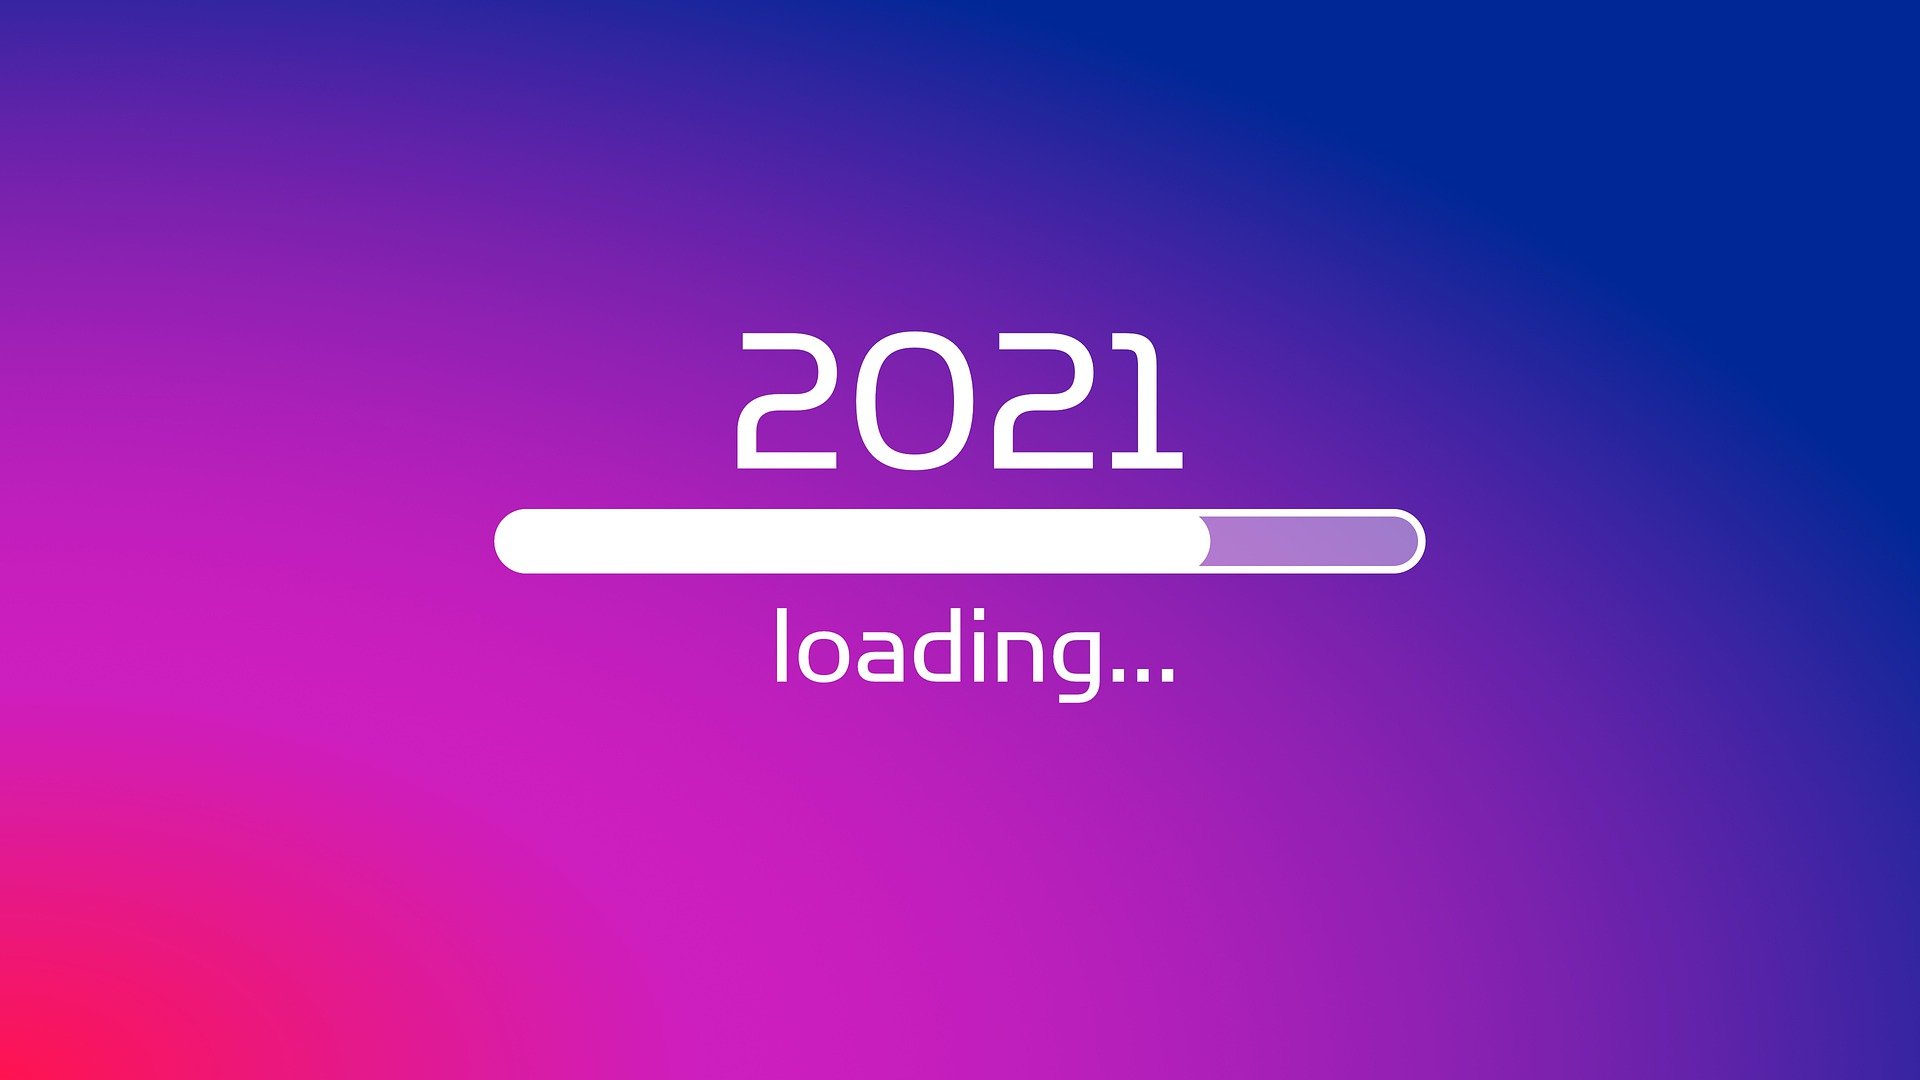 A loading bar for 2021